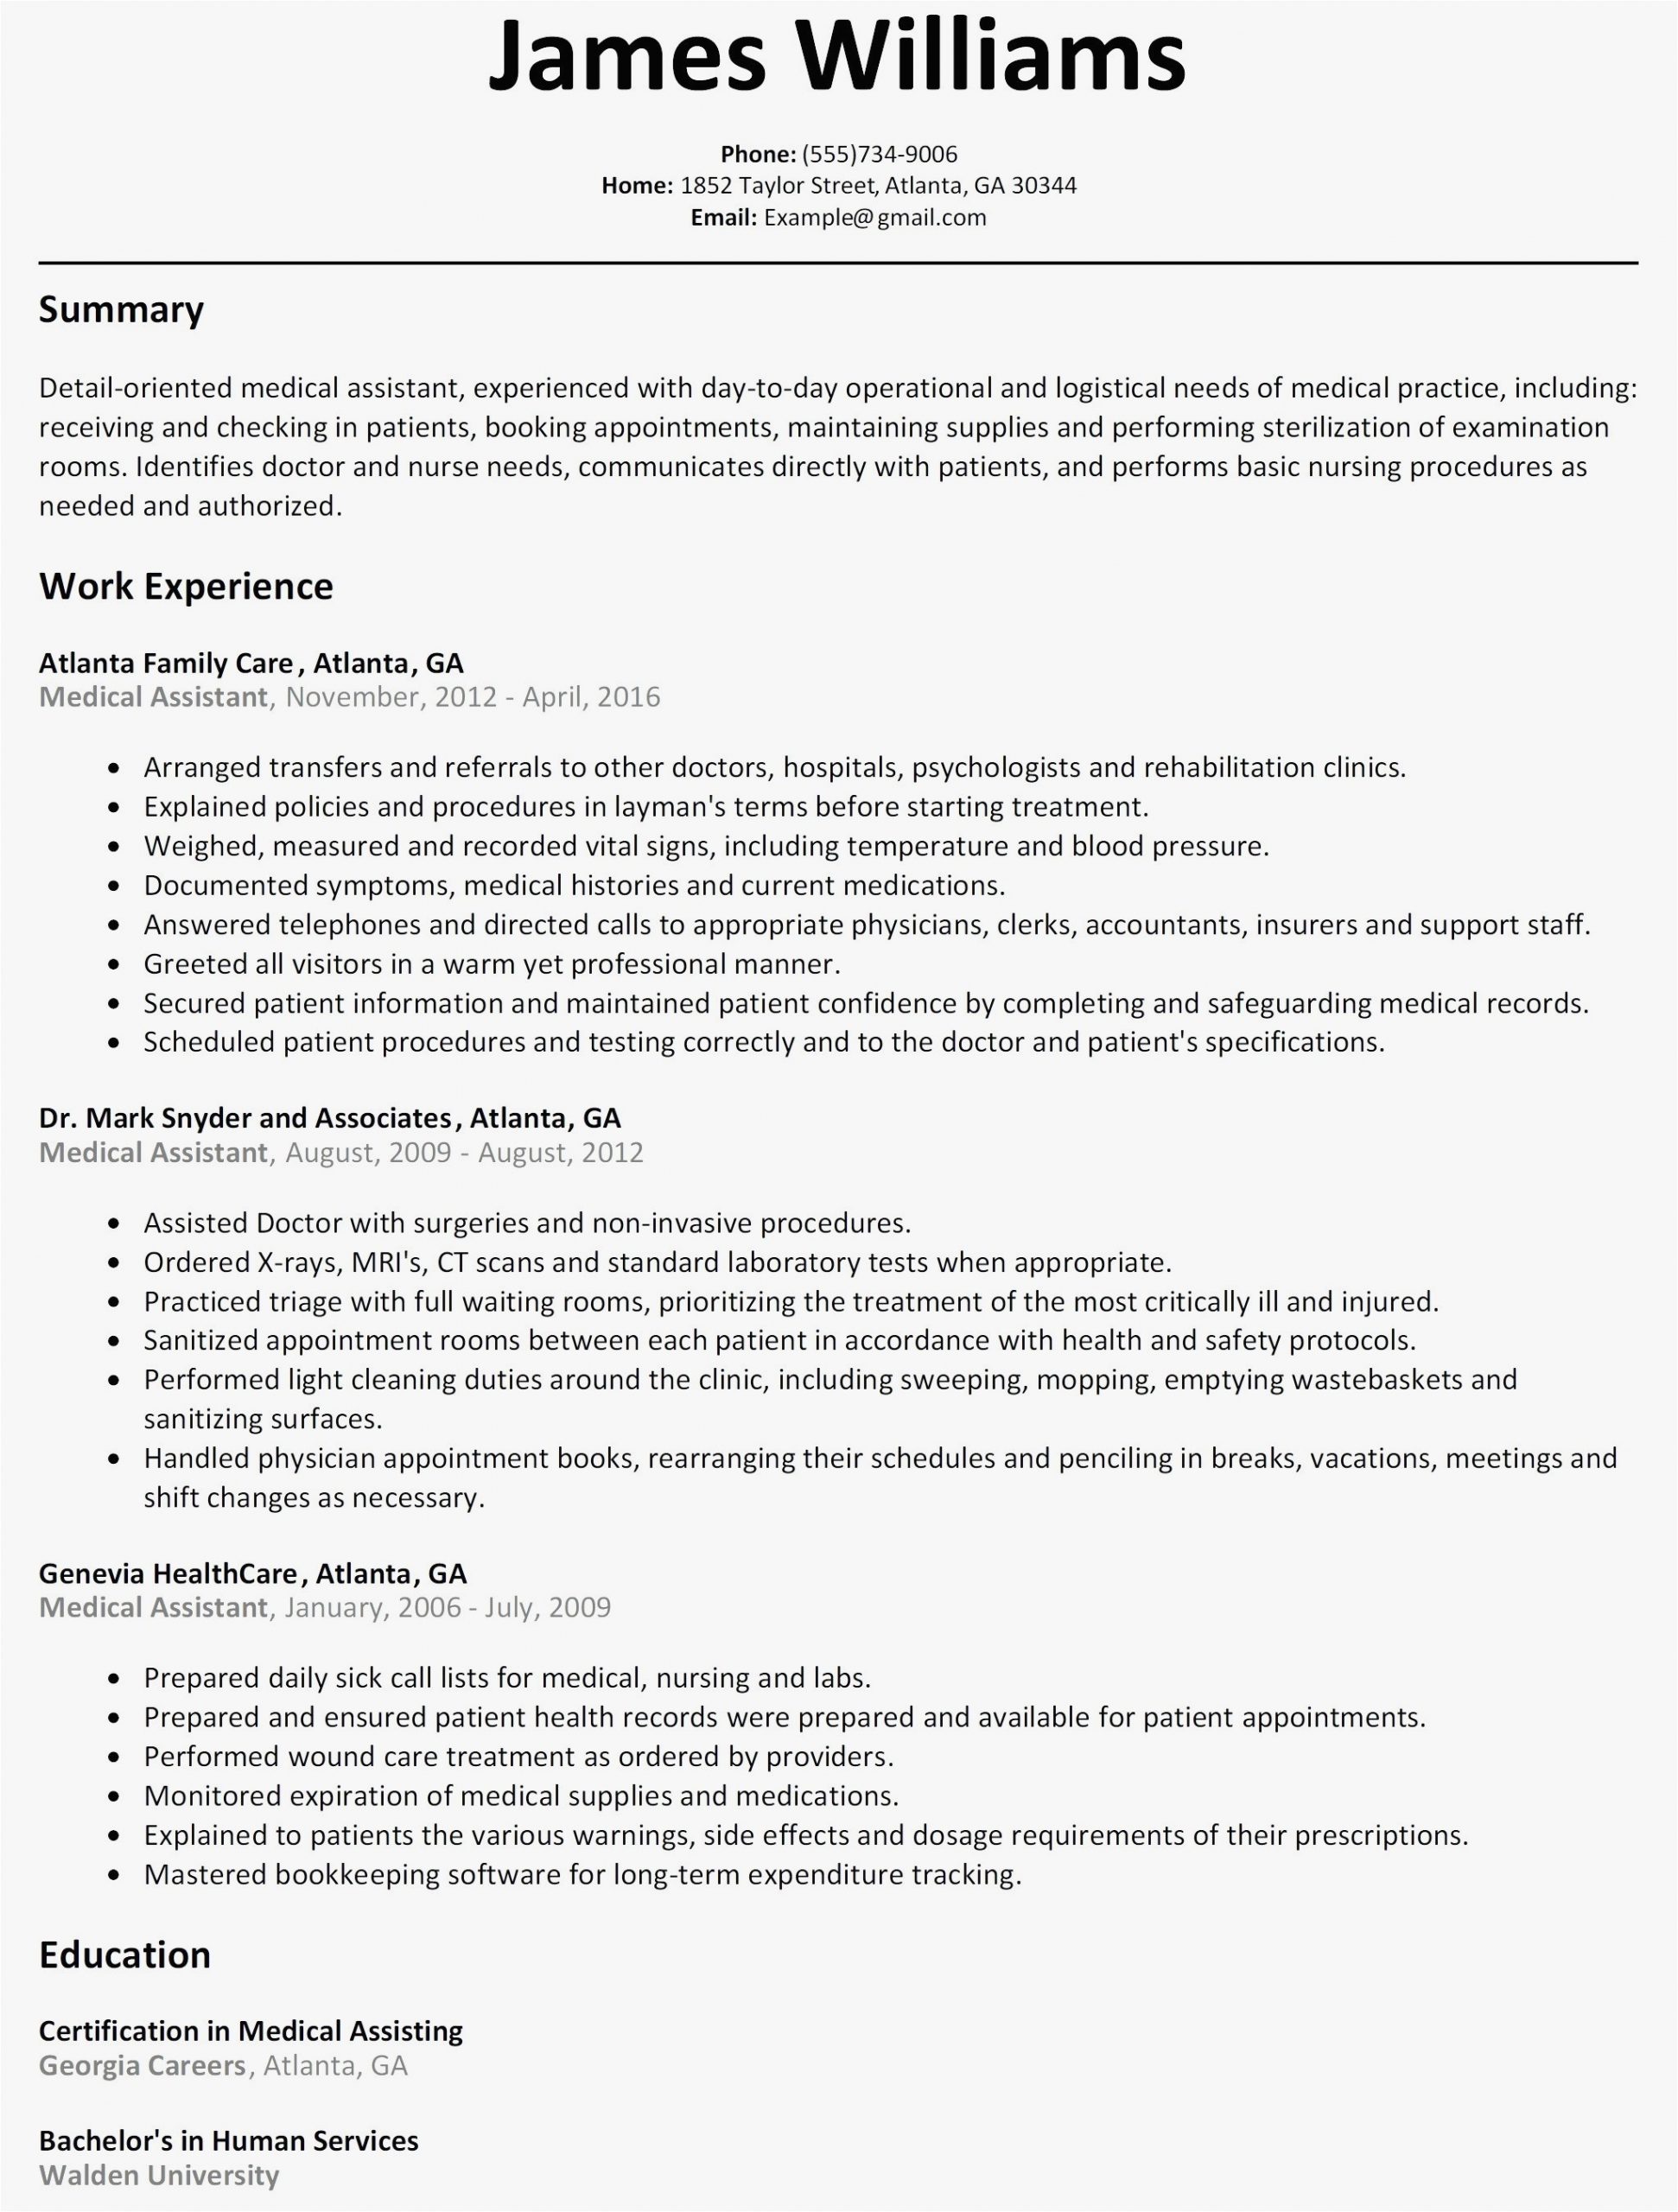 Sample Resume for someone Returning to the Workforce 12 13 Resume for Returning to Workforce